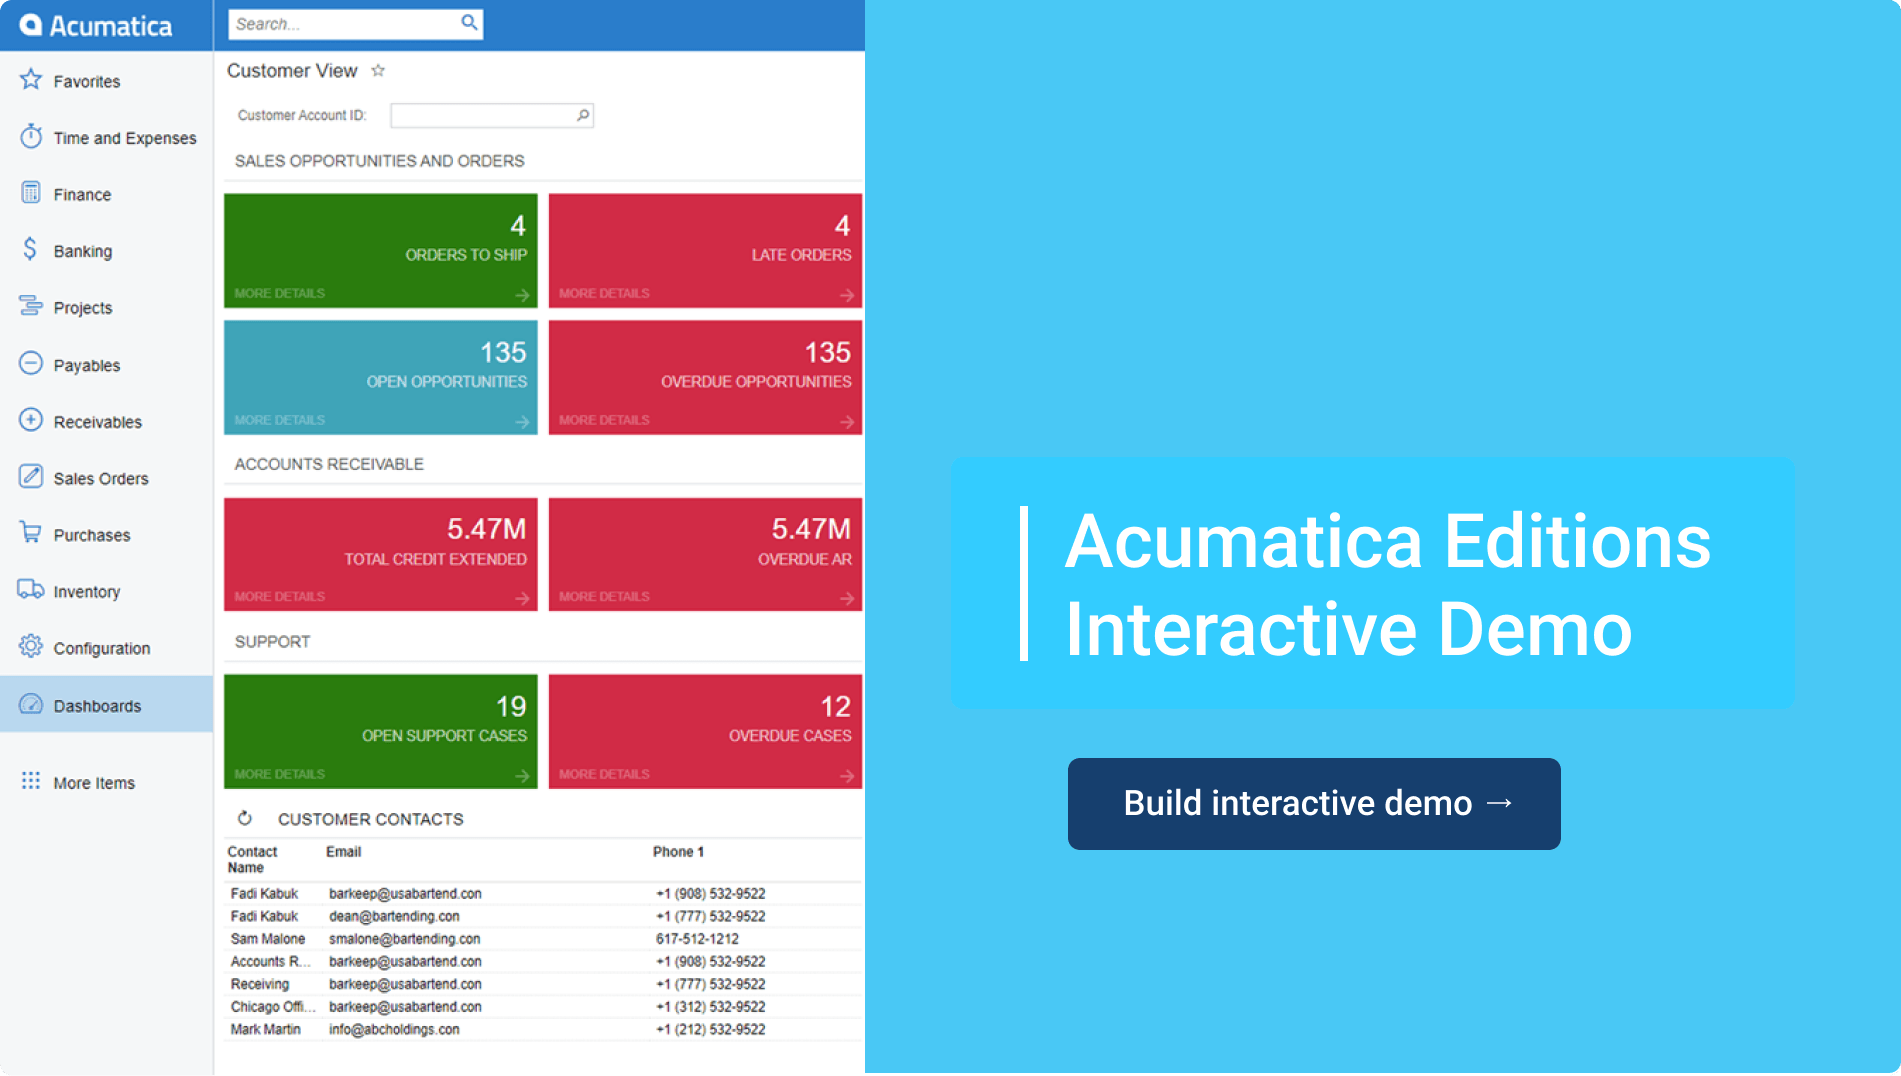 Build Your Own Acumatica Editions Demo